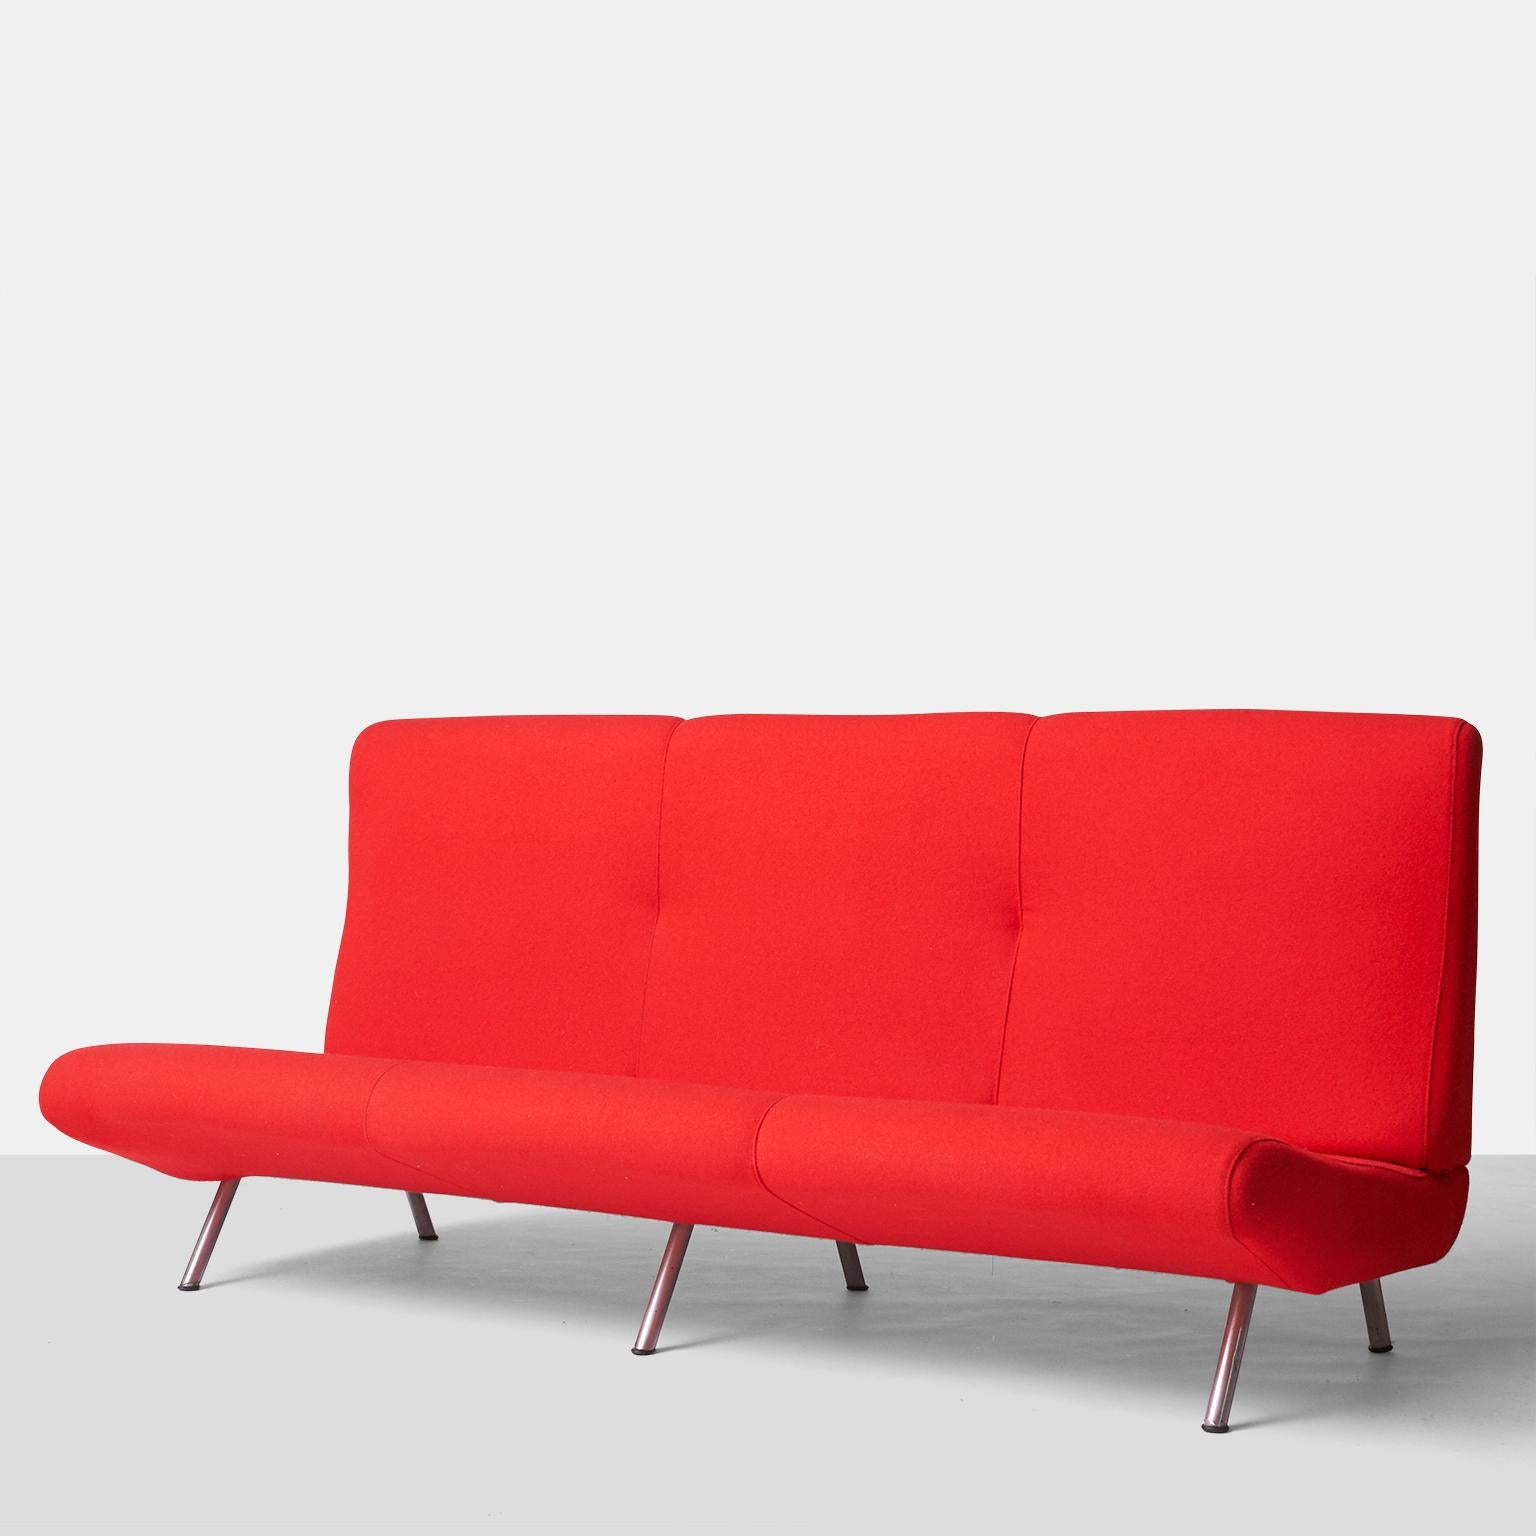 A three-seat sofa by Marco Zanuso for Arflex, in cherry red wool. Features an armless, low seat, high back, and matte-chromed steel legs. Marked accordingly on a fabric label.
Produced in Italy.

Would benefit from restoration. 